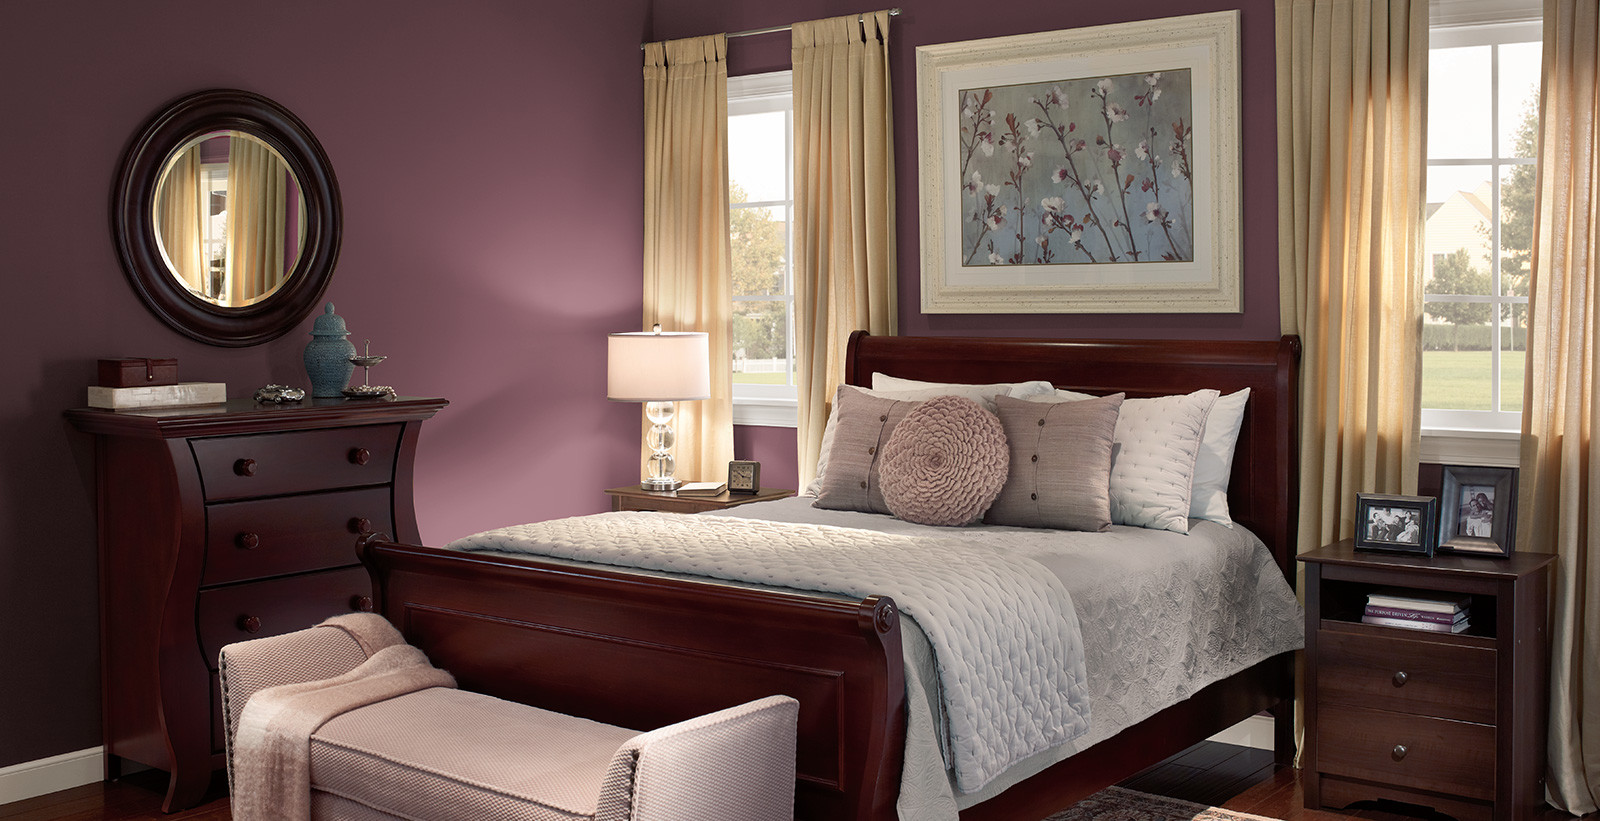 Behr Bedroom Paint Colors
 Classic and Traditional Bedroom Ideas Paint Colors